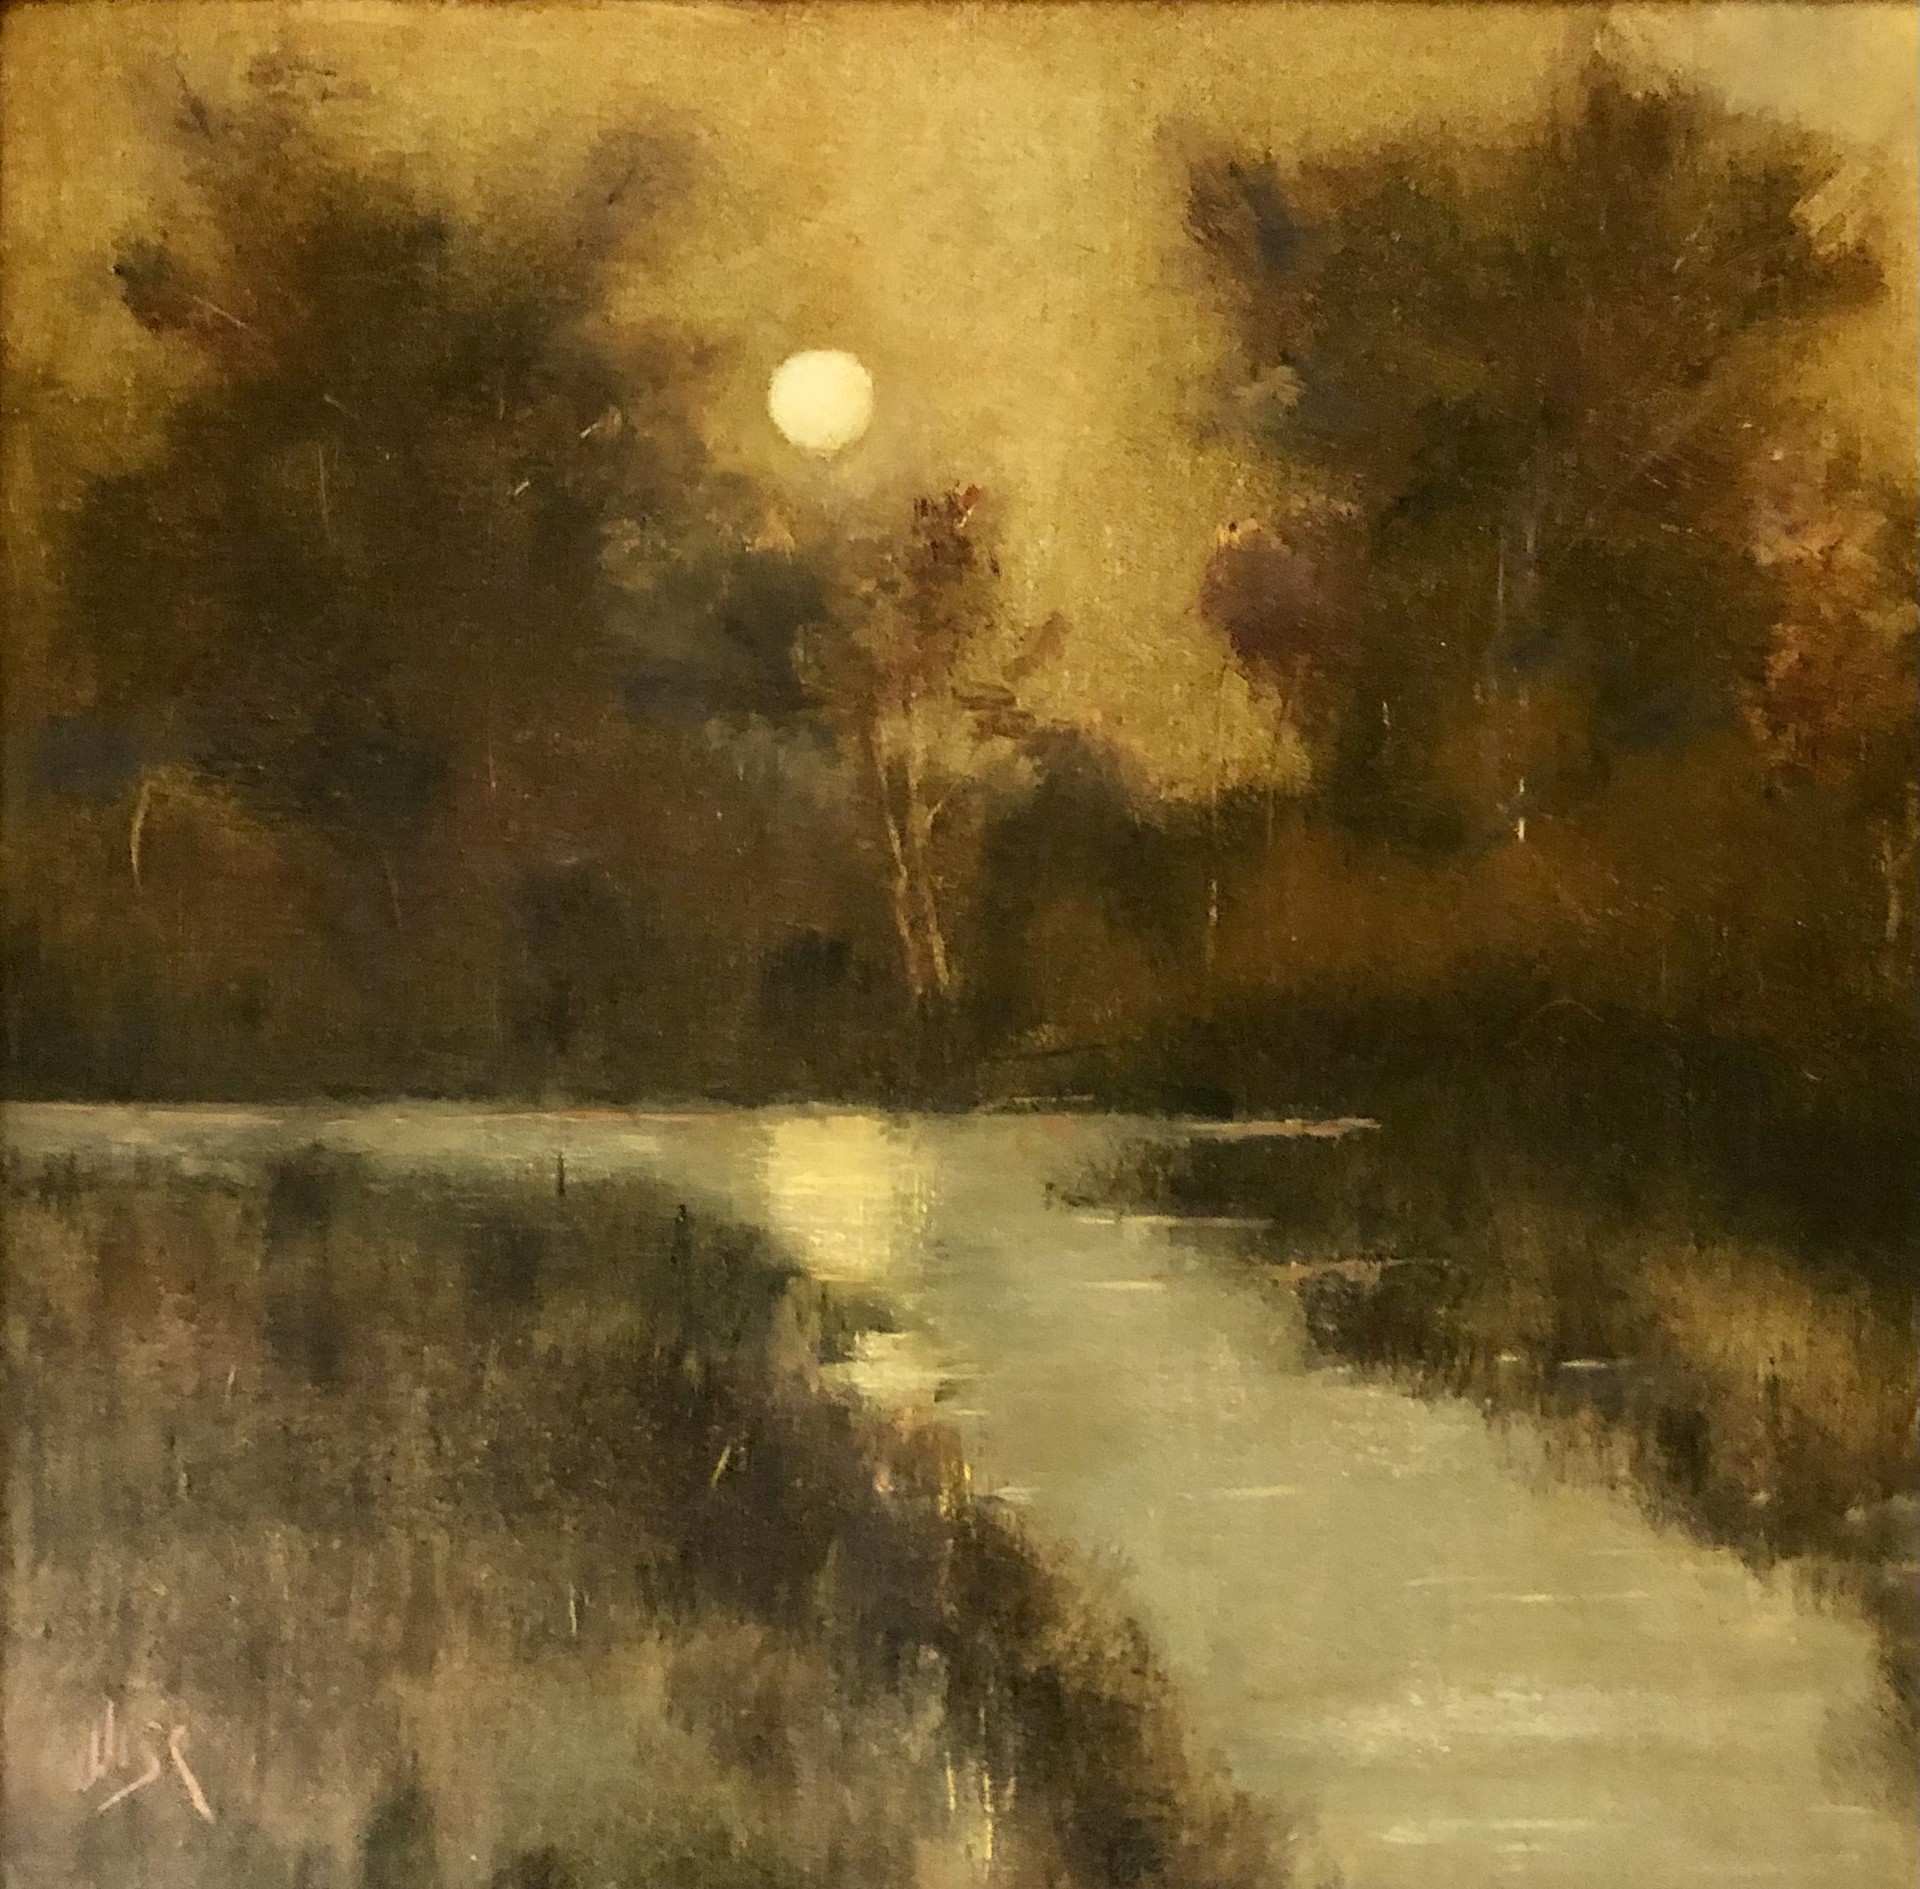 Moon at Dusk by Marie Wise